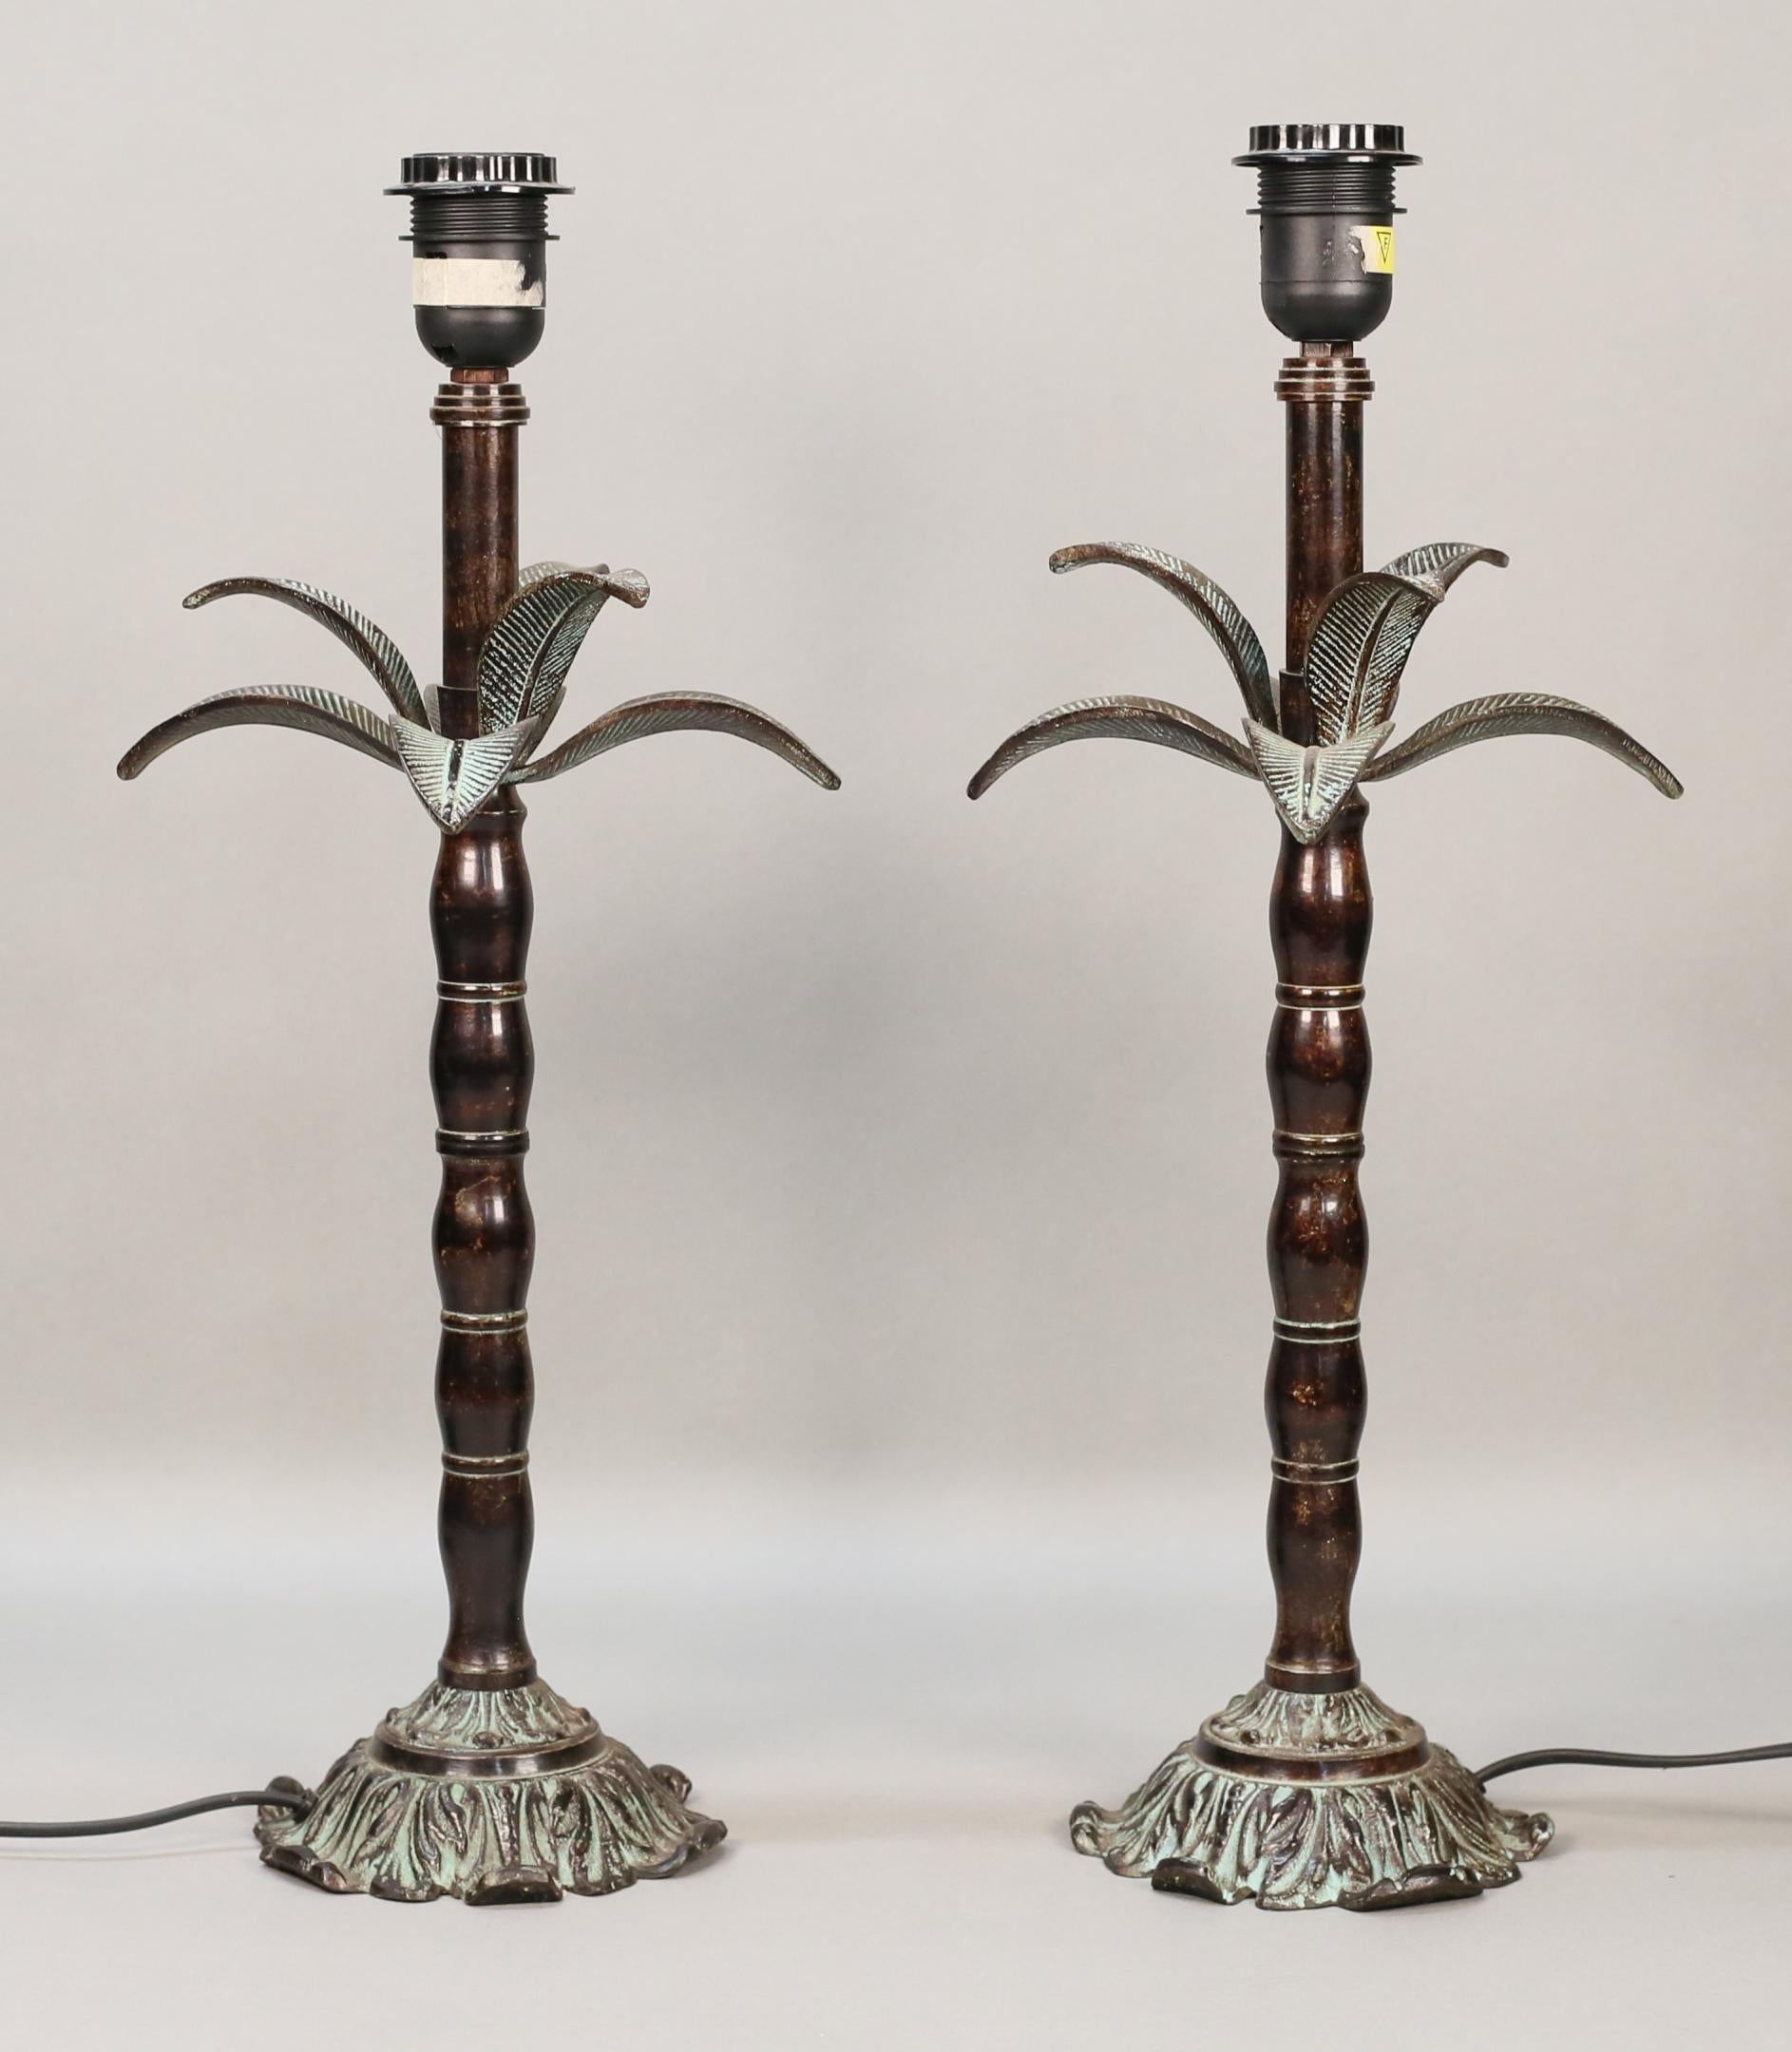 Pair of Bronze Palm Tree Stylized Accent Lamps with aged Verdigris details

Anonymous, in the manner of Maitland-Smith
20th century; Europe
Bronze

Approximate size: 19.75 (h) x 8 (w) x 8 (d) in. (without shades)

A handsome pair of bronze Palm Tree